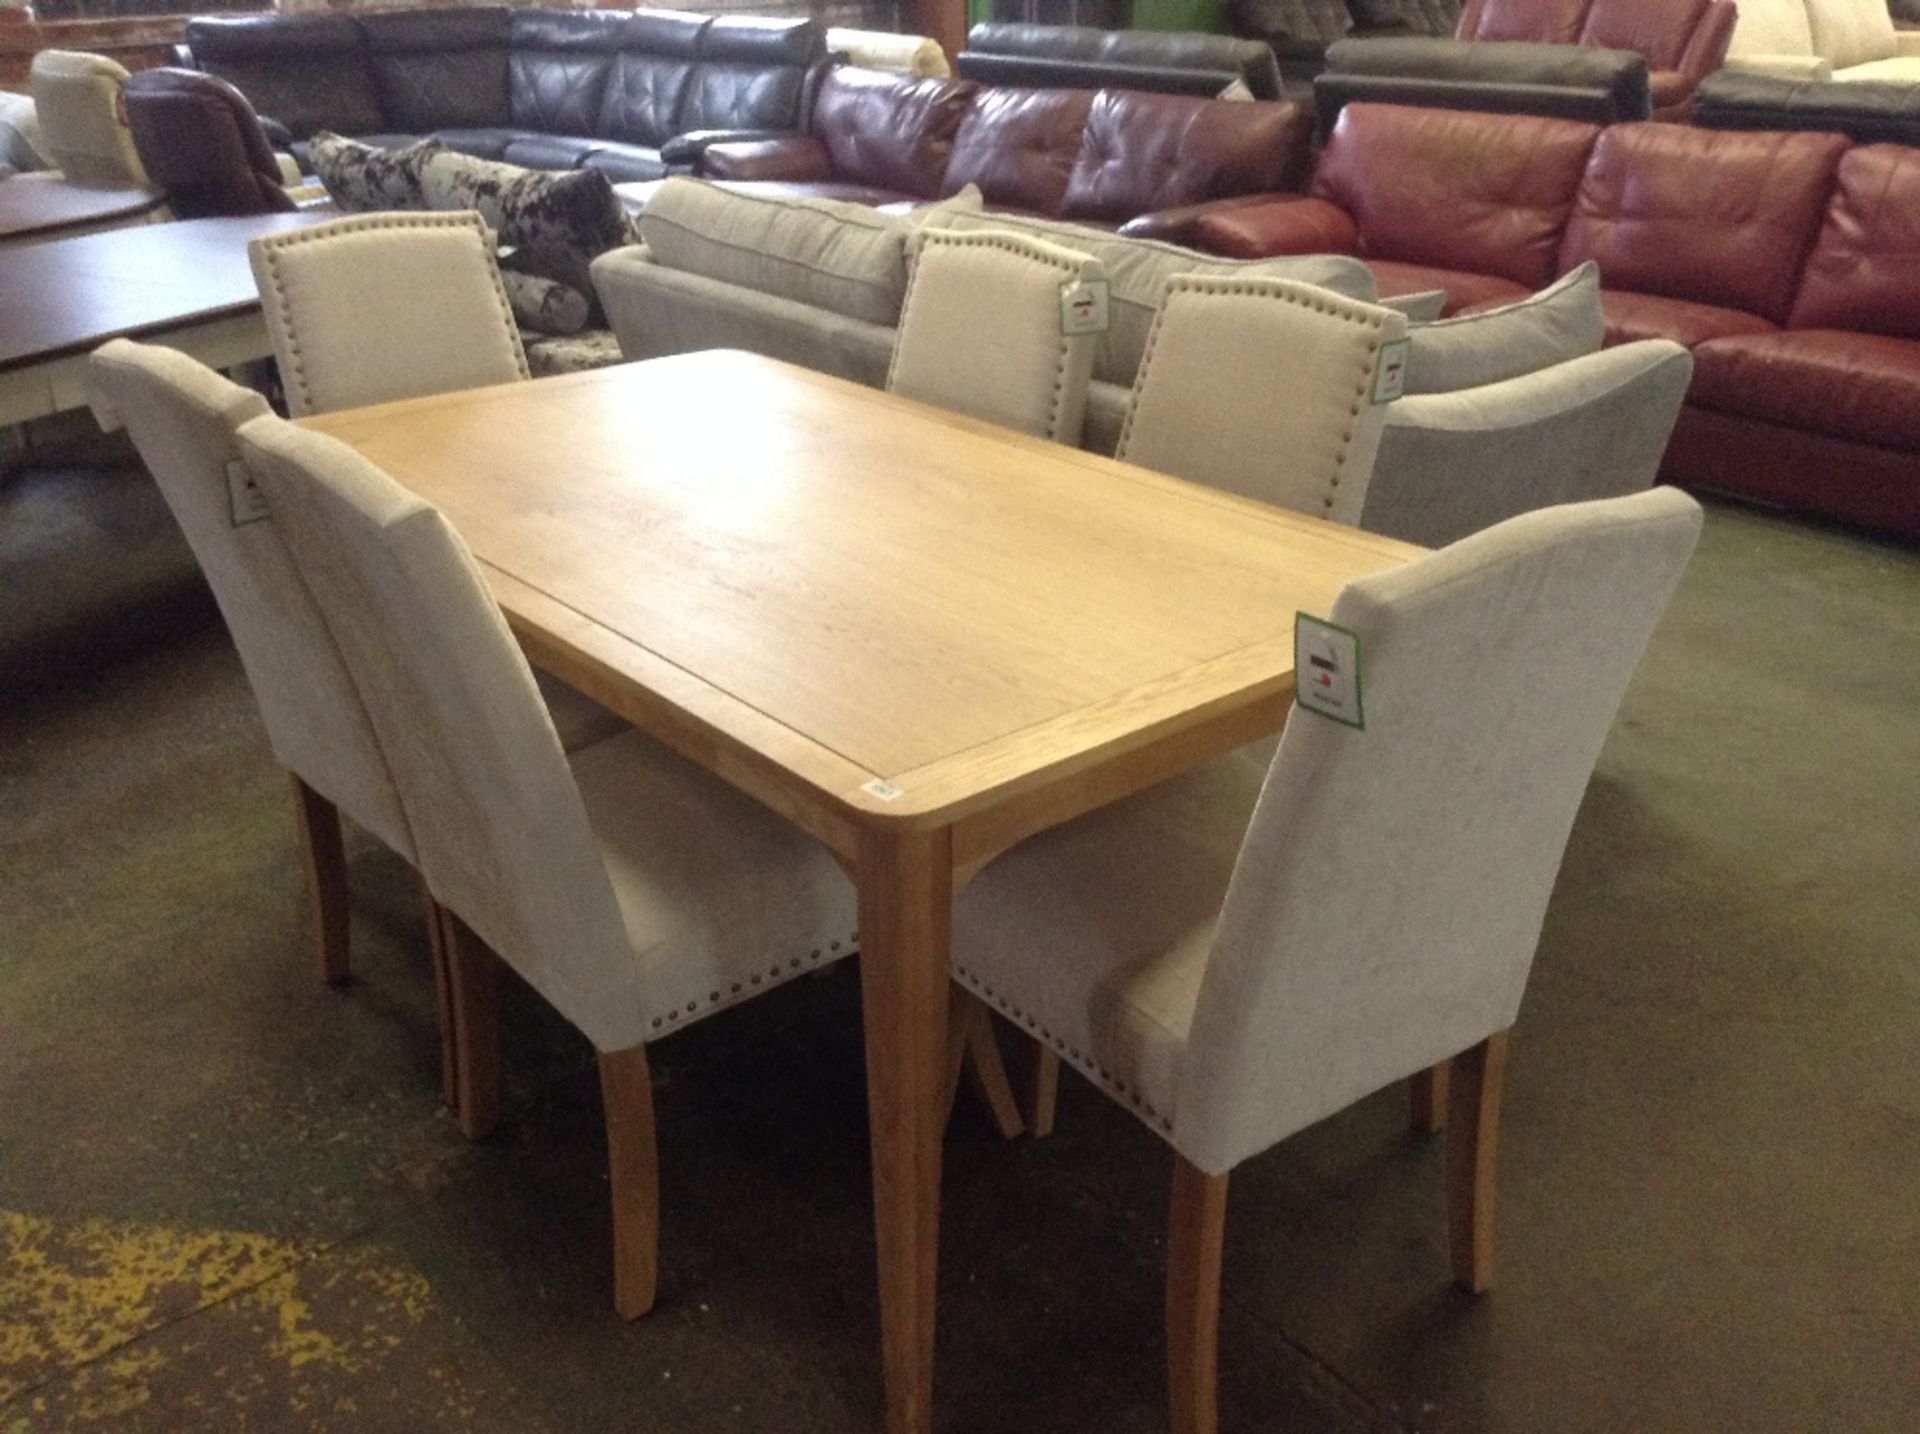 LEWISHAM OAK TABLE AND 6 NATURAL STUDDED CHAIRS